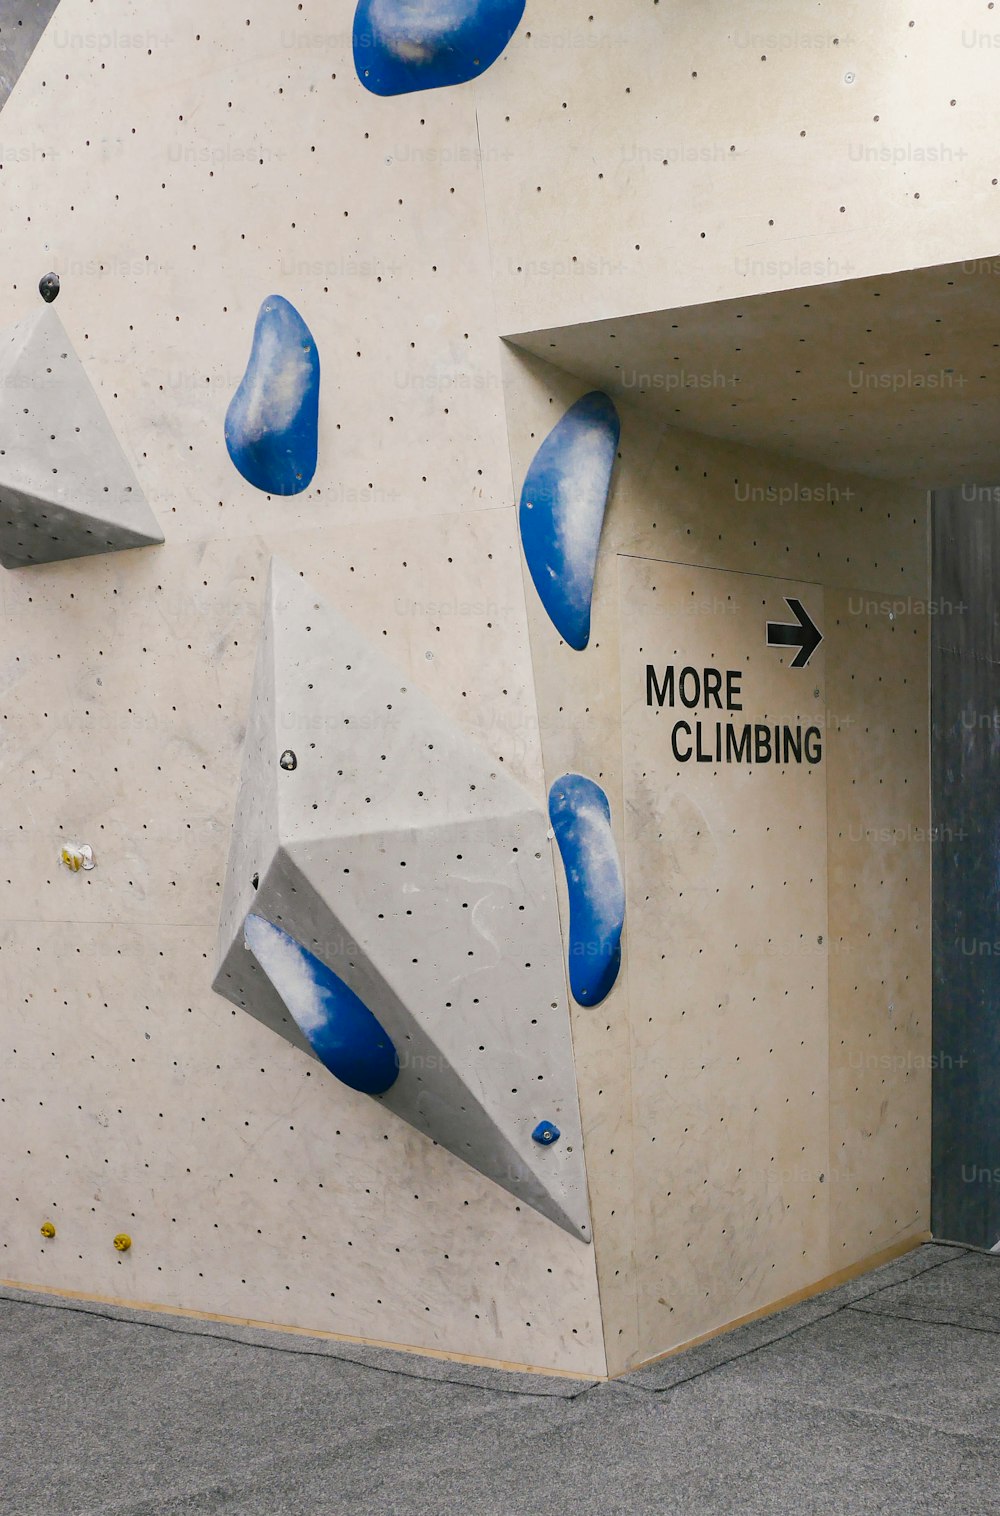 a climbing wall with a sign pointing to more climbing